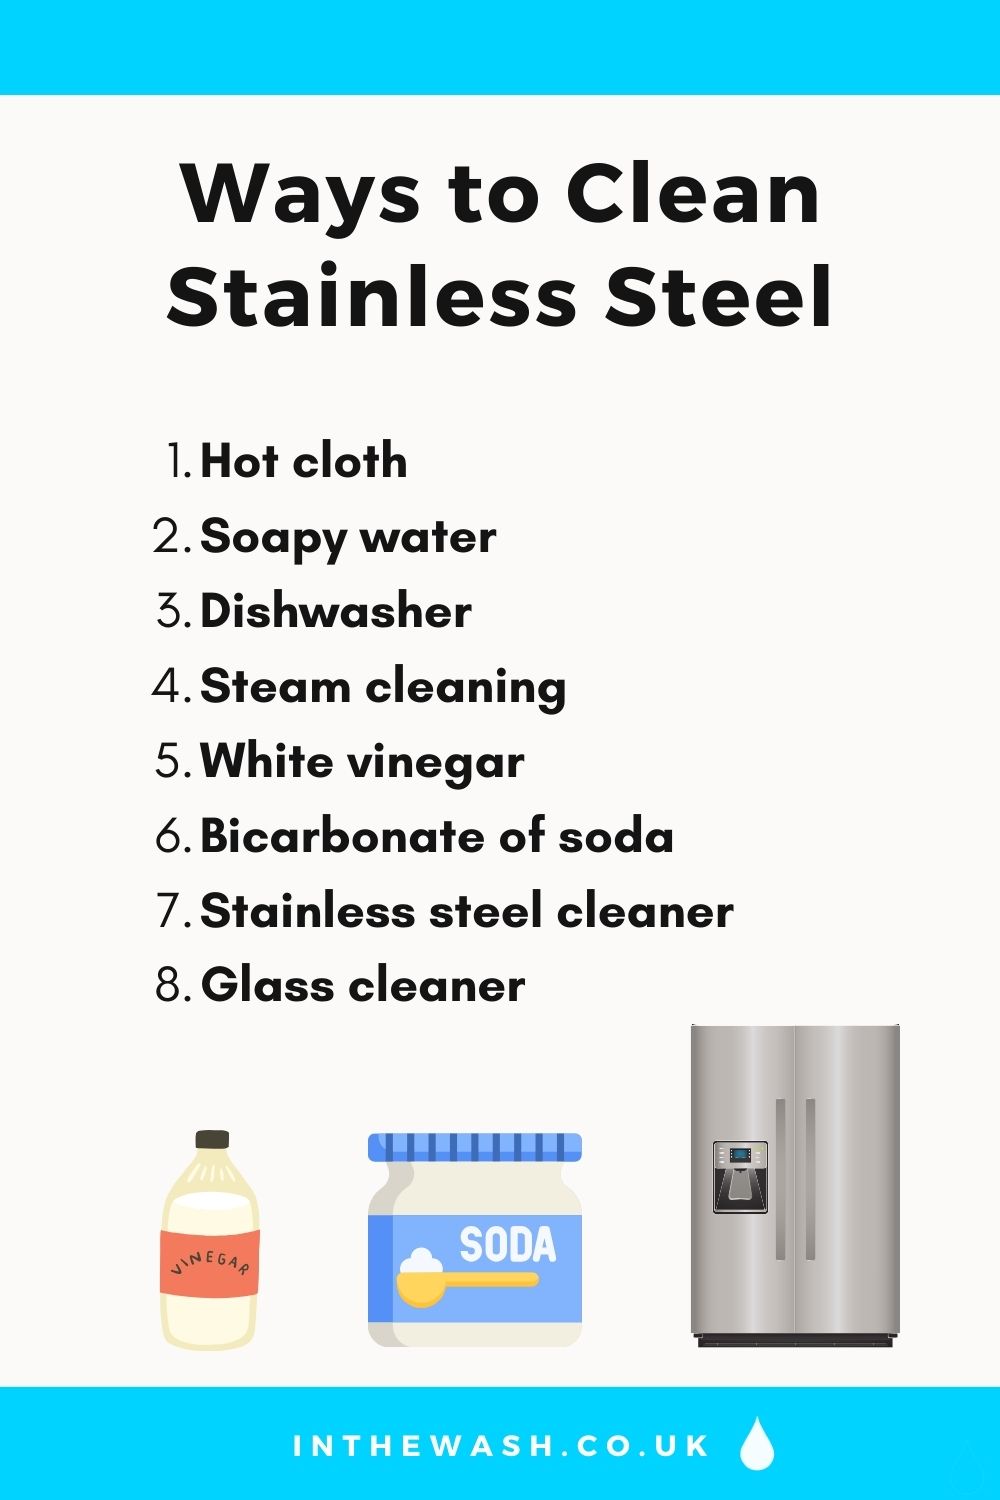 Ways to clean stainless steel